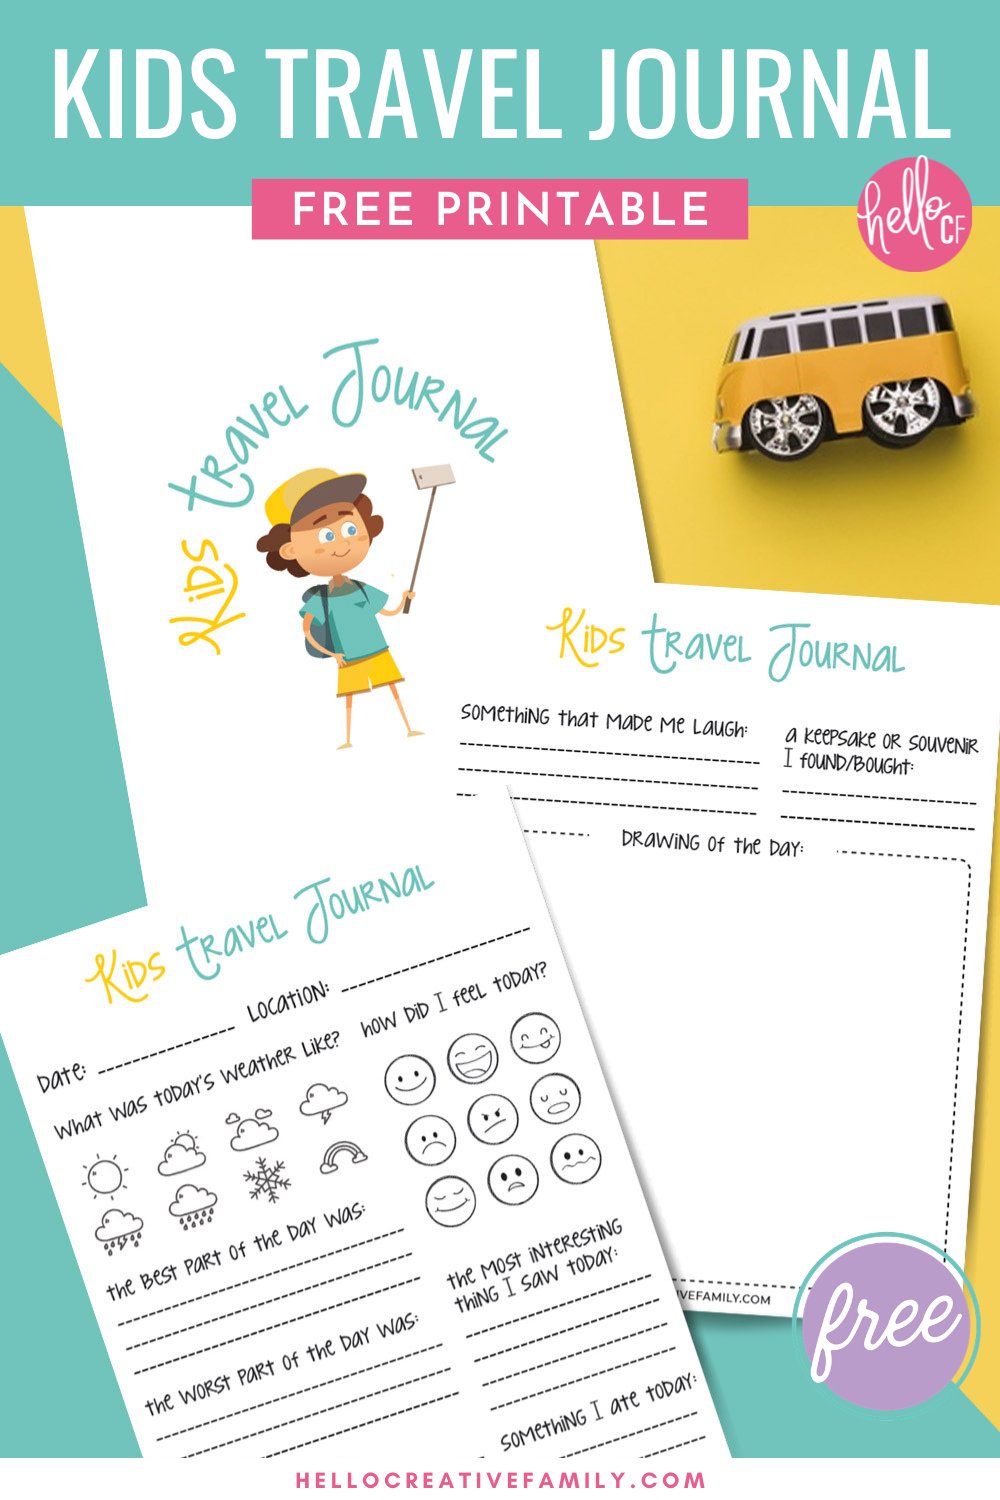 Whether you are planning a family road trip across the USA, a vacation to a foreign country or a staycation in your own state or province you are going to love this free kids travel journal printable! Help your kids chronicle family vacations and create memories that will last forever with this fun and easy to fill out kids travel diary!